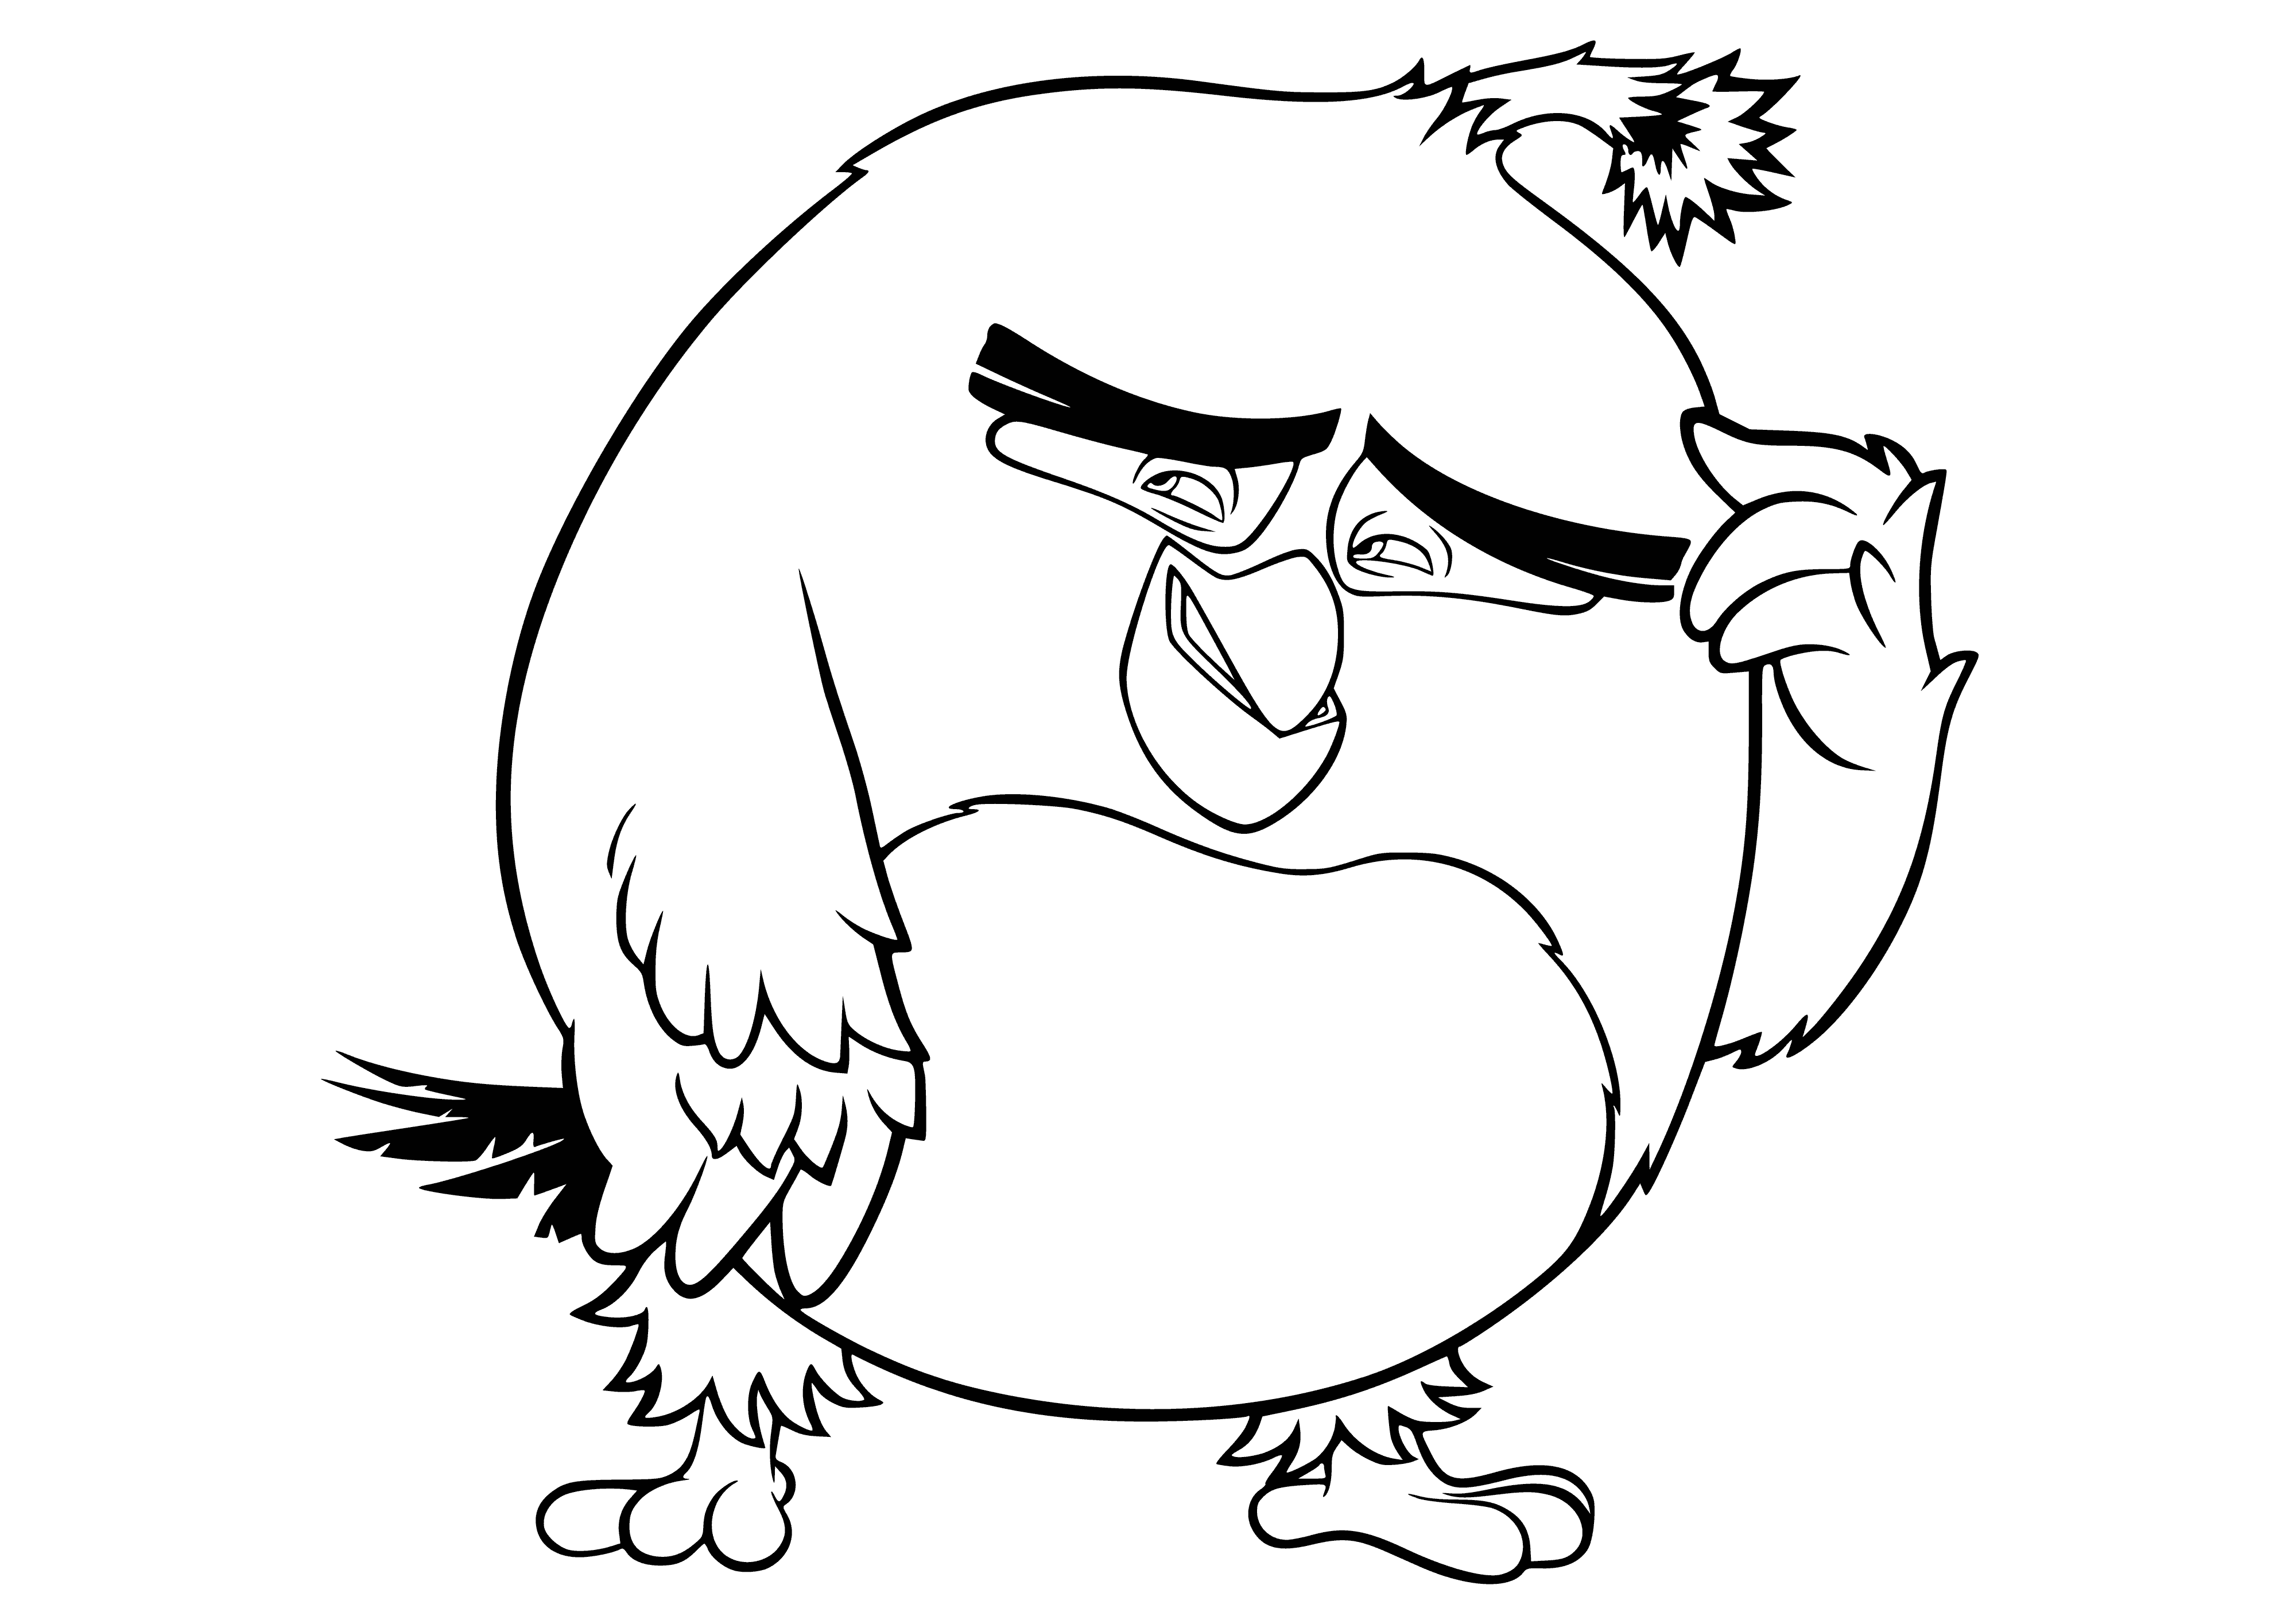 coloring page: Angry Birds - Bombs: large, round, red birds with brown bombs held in beaks, ready to drop them. Eyes alight with anger.